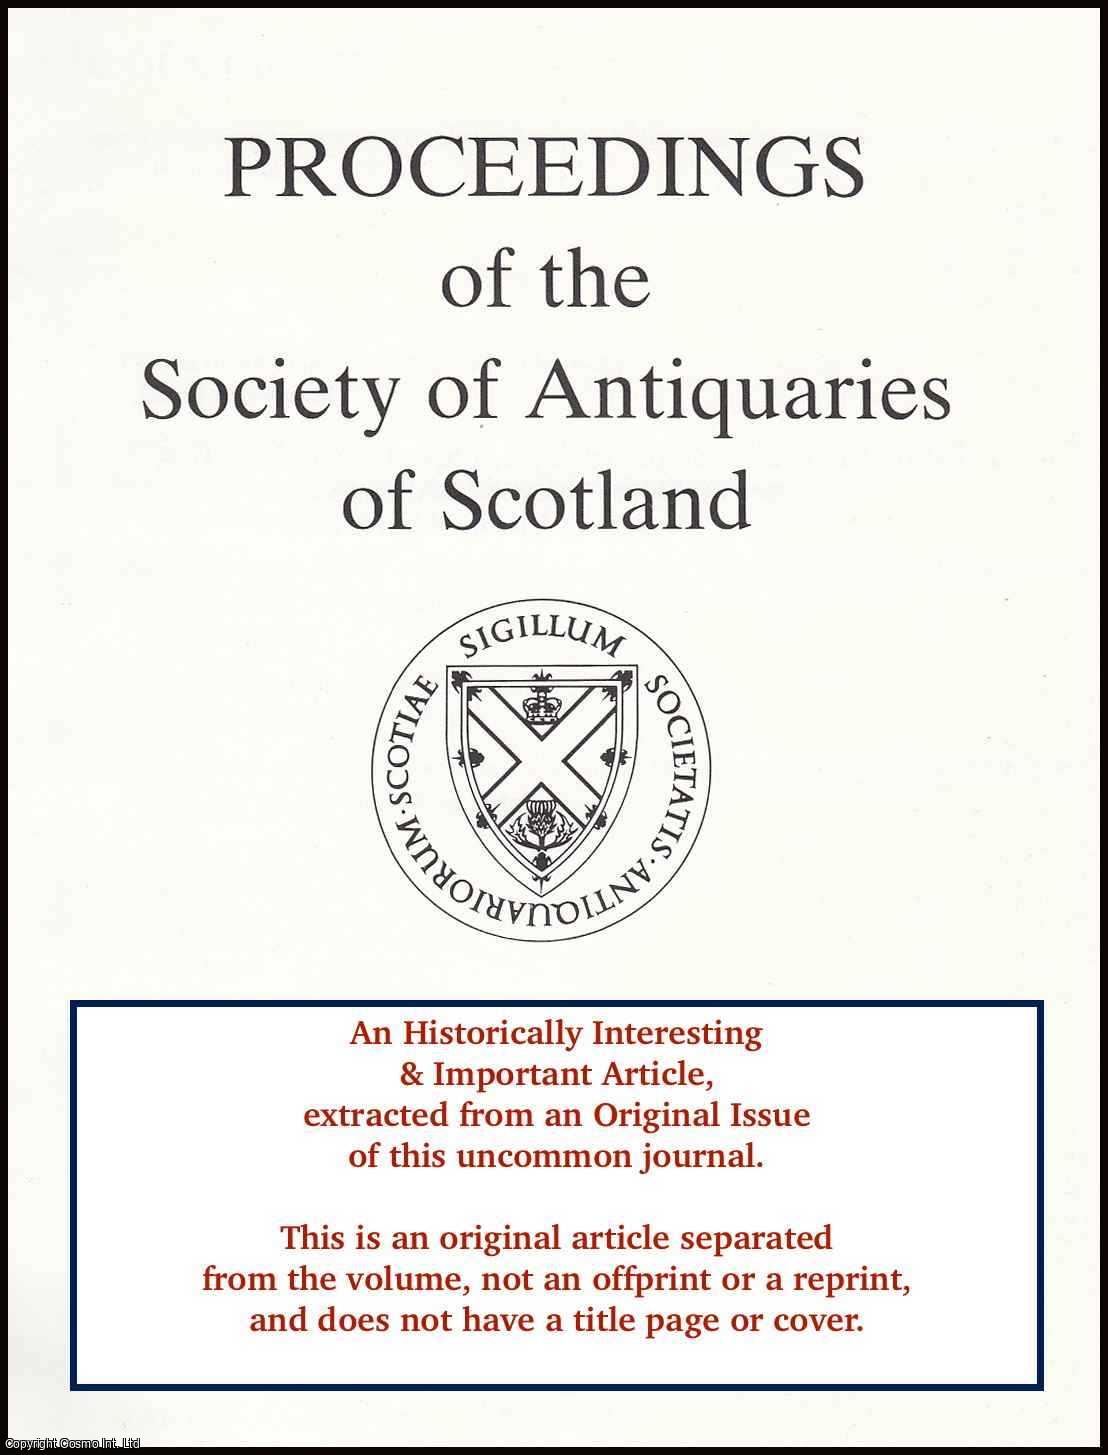 David Caldwell & John Lewis - Linlithgow Palace: An Excavation in The West Range and a Note on Finds From The Palace. An original article from the Proceedings of the Society of Antiquaries of Scotland, 1996.